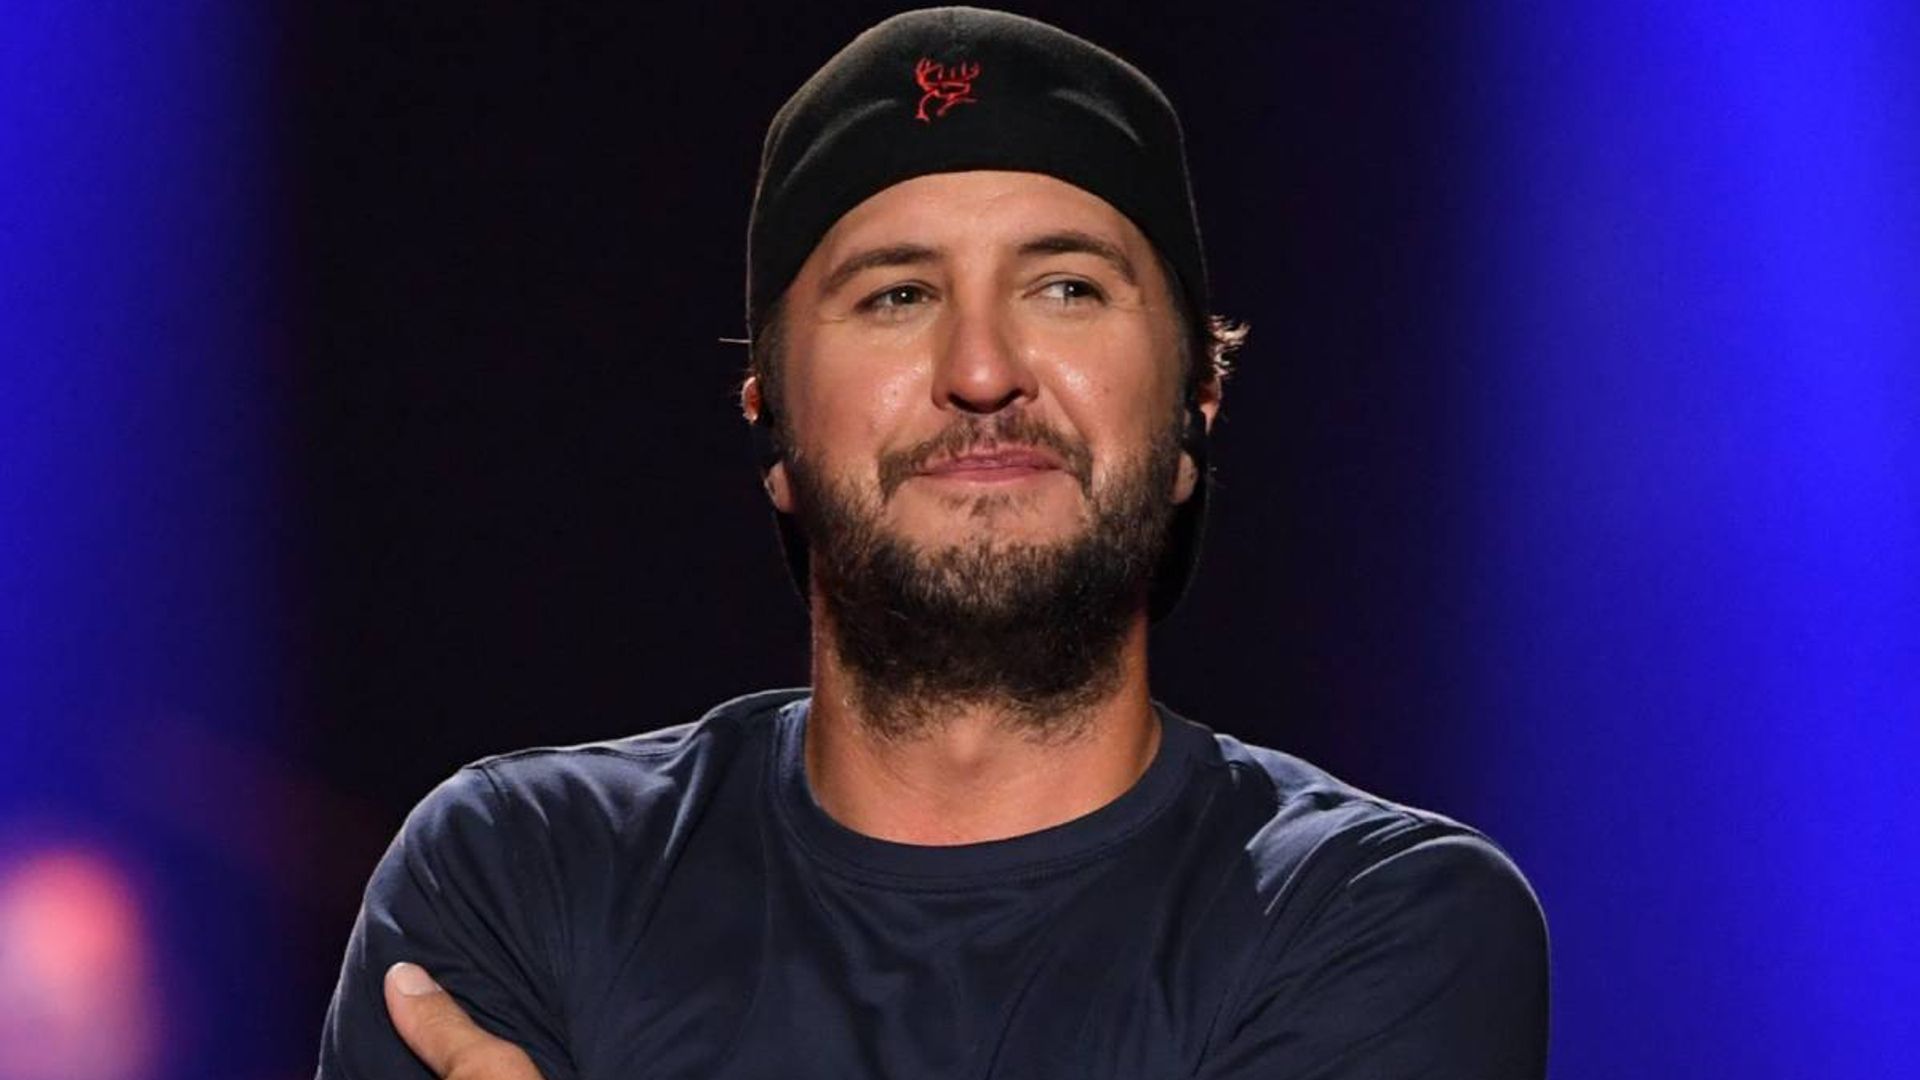 Luke Bryan receives outpour of love as he shares bittersweet message with fans